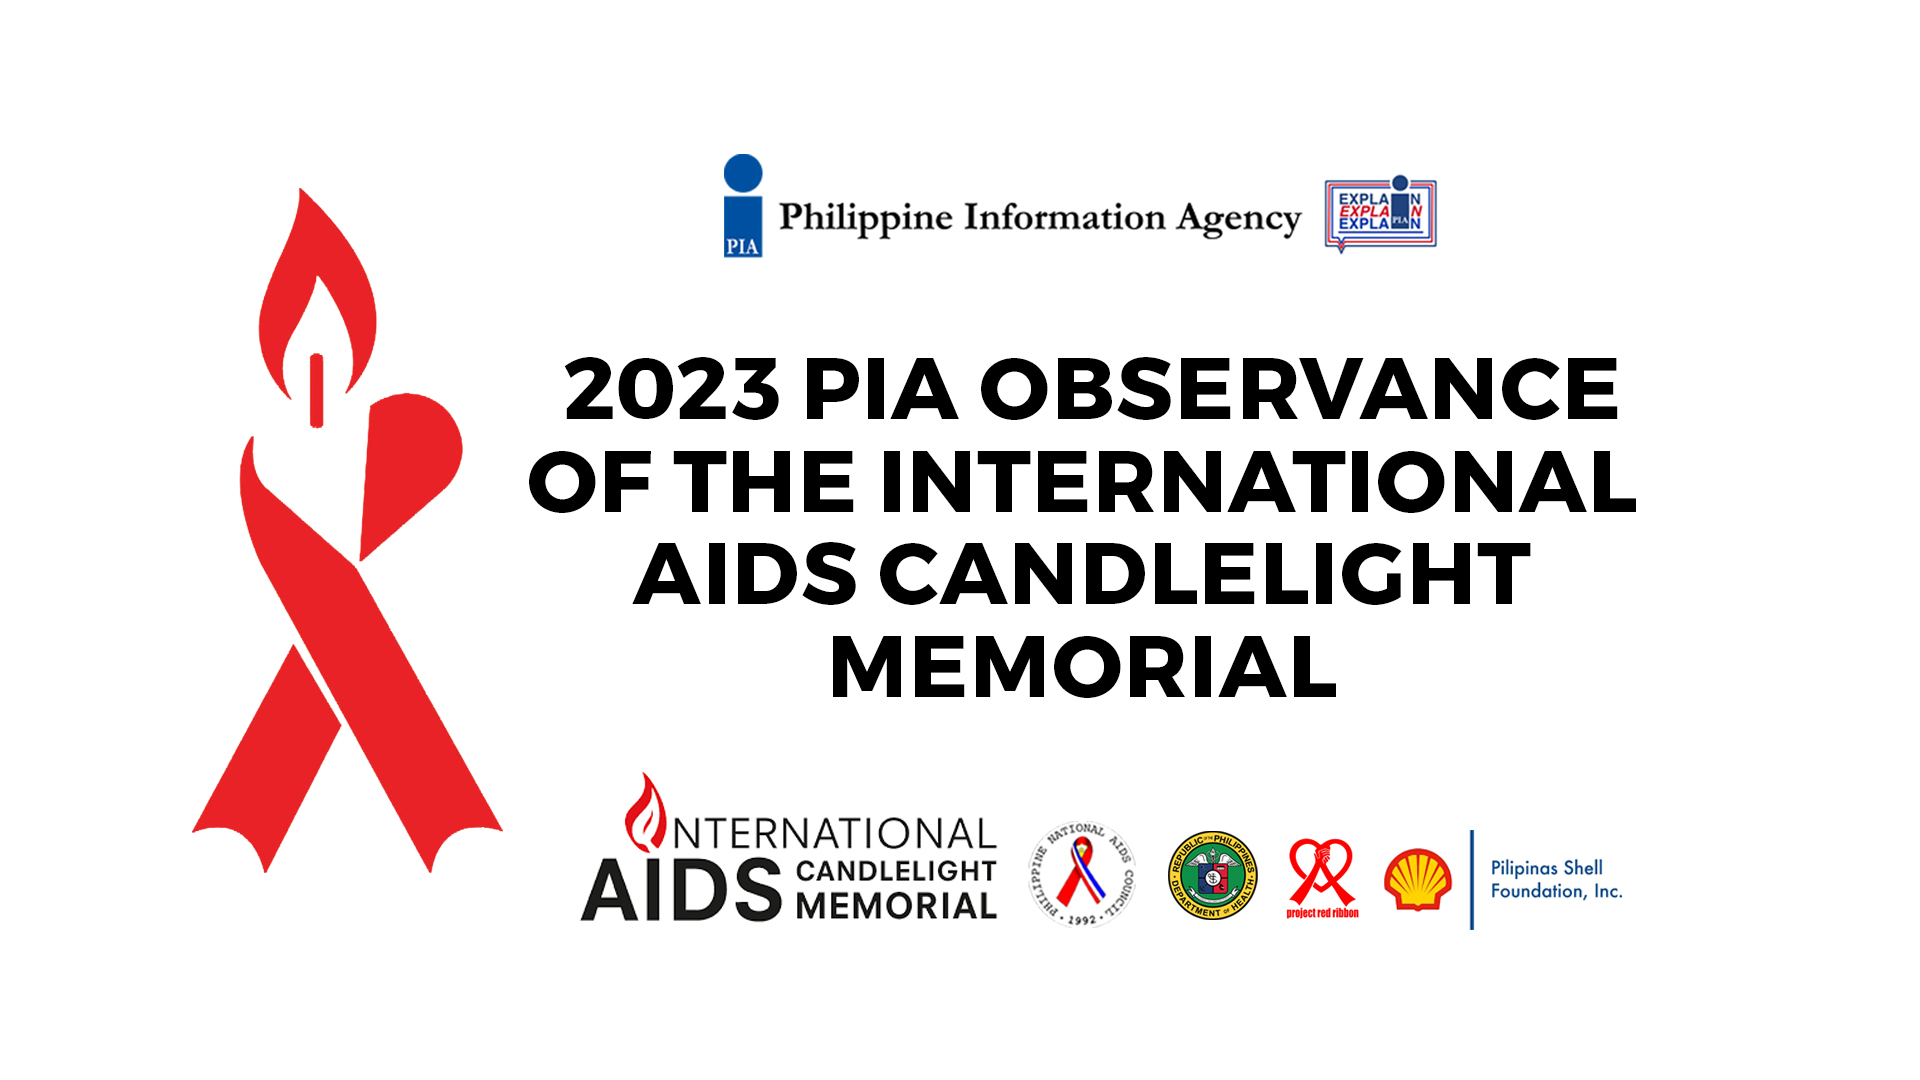 2023 PIA Observance of the International AIDS Candlelight Memorial